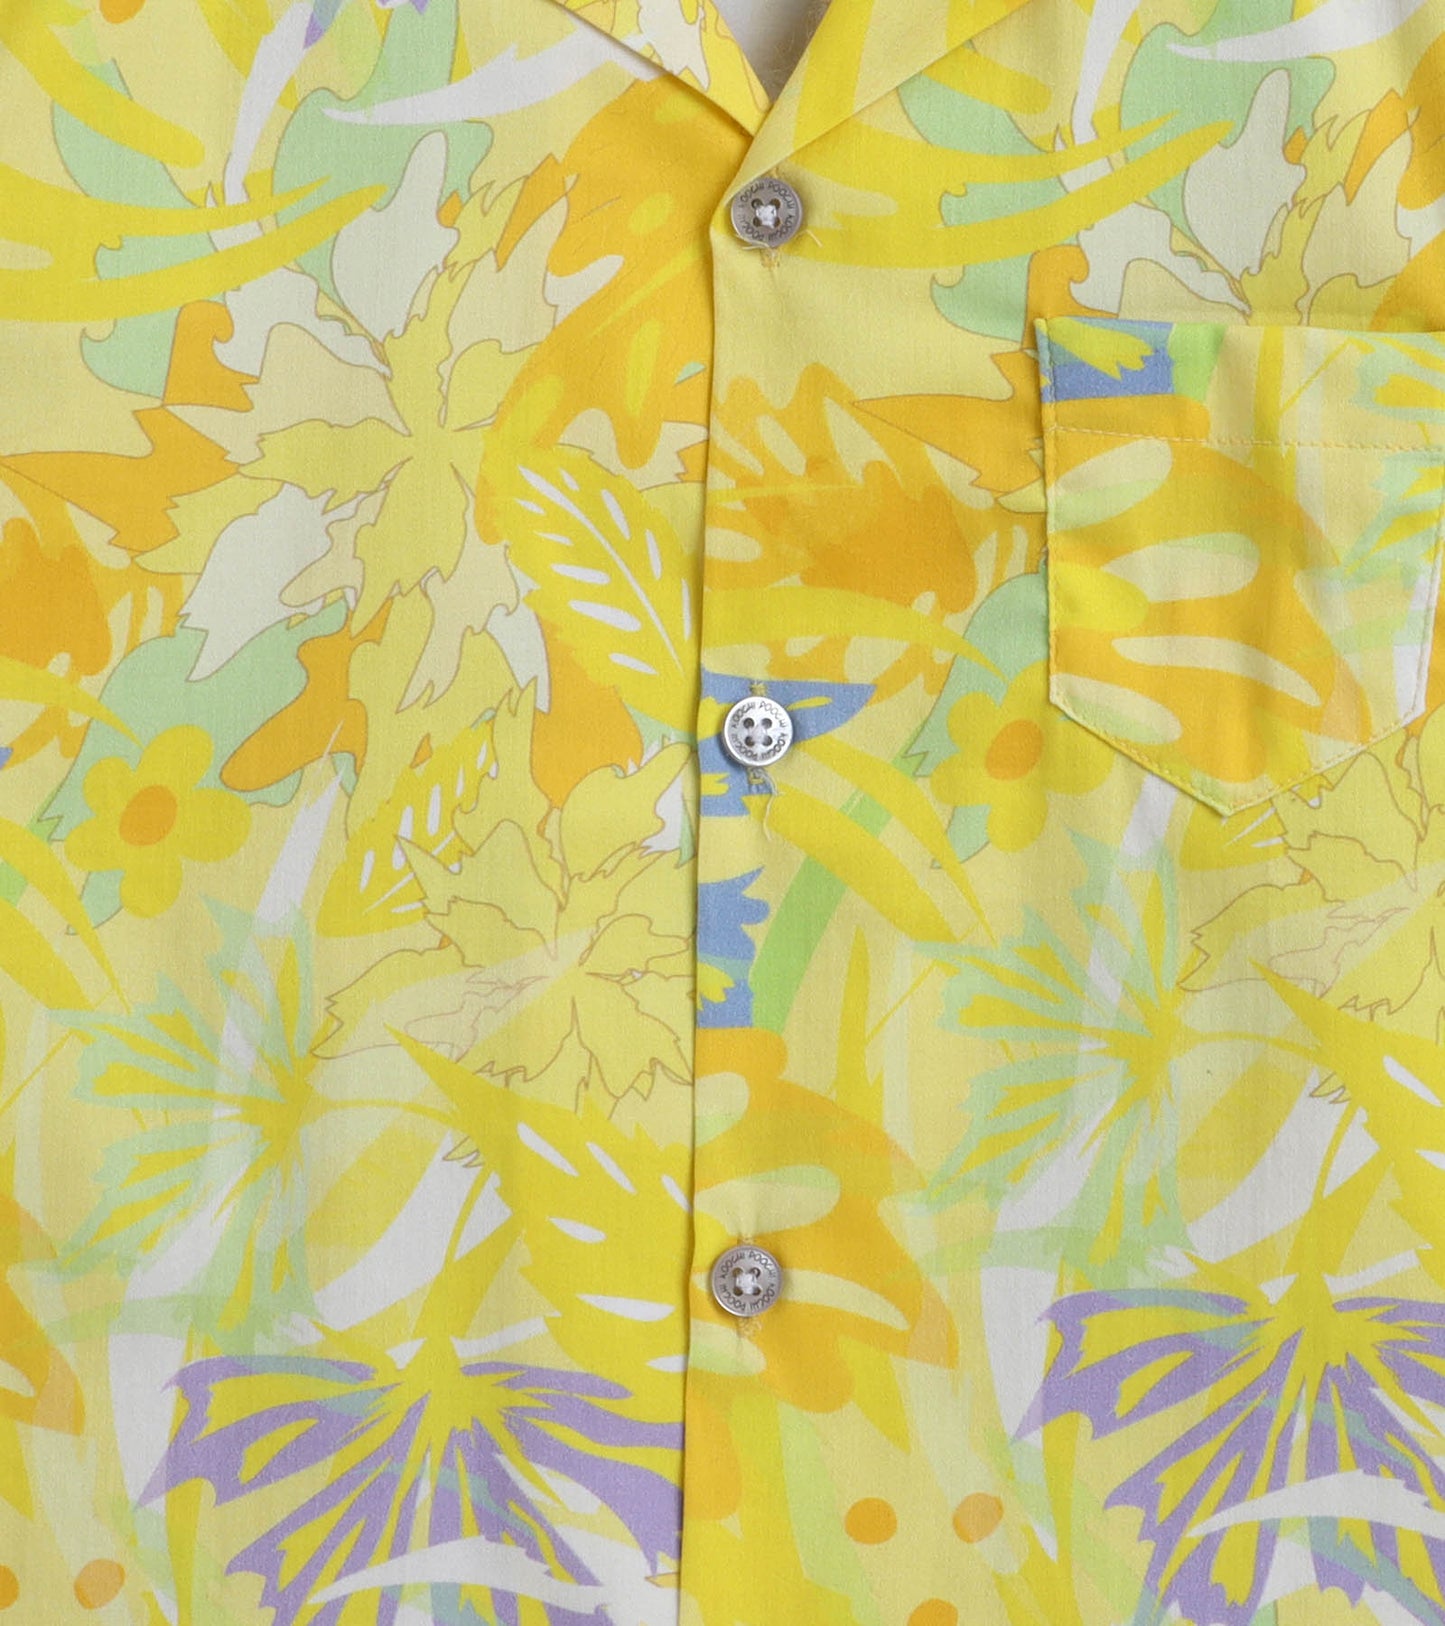 Yellow Leaf Digital printed Shirt with White solid Shorts